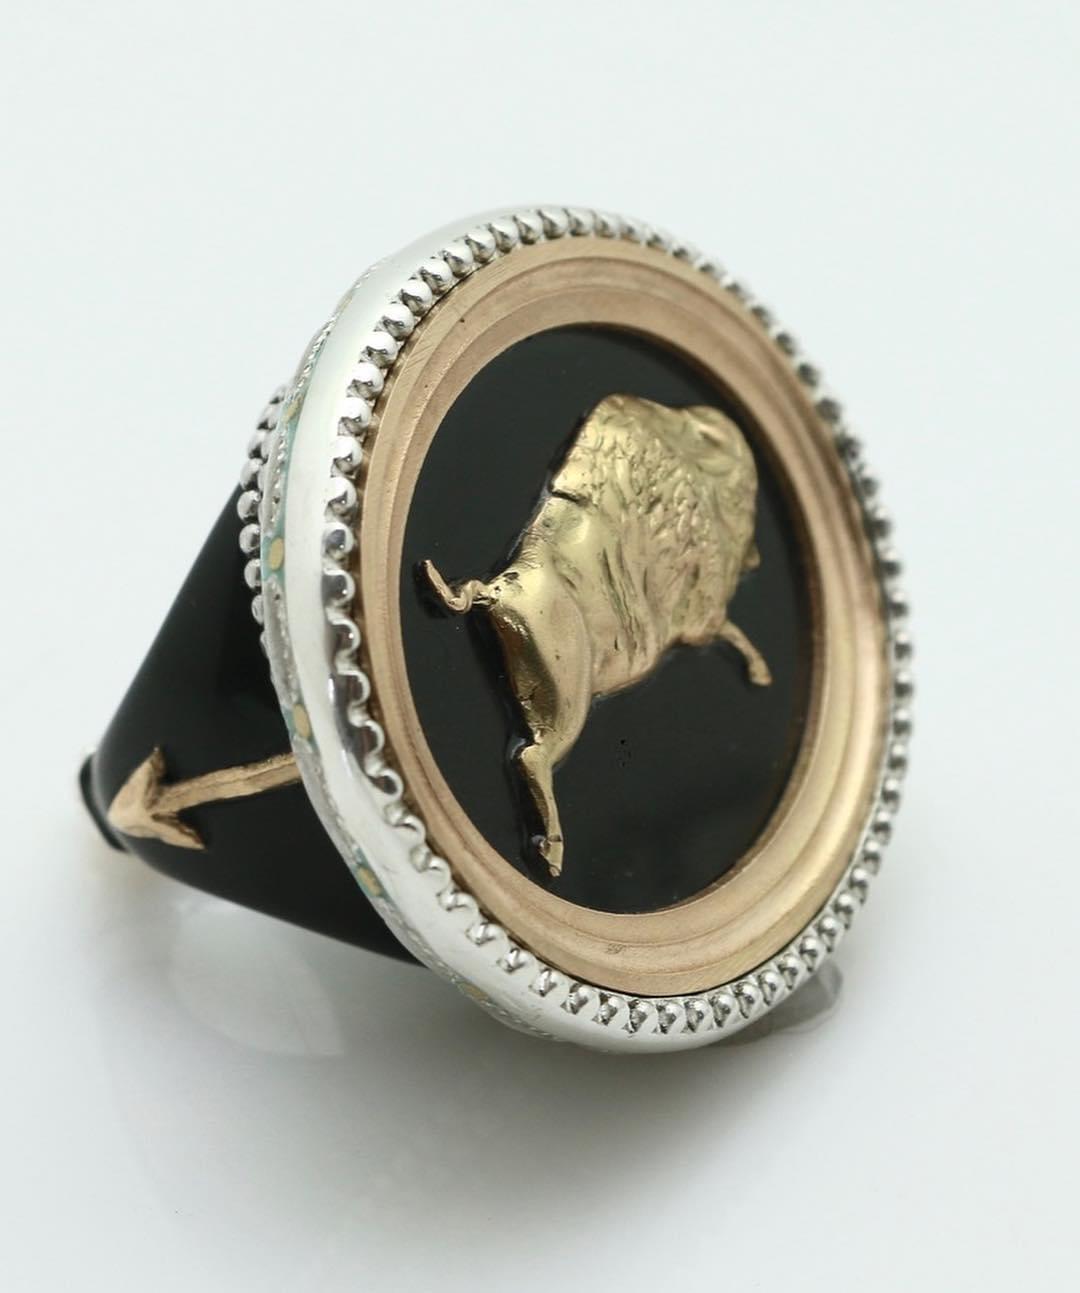 Contemporary Hand-Carved Buffalo Horn and Gold Ring with a Diamond and Enameled back.

Hand-carved buffalo horn large cocktail-style ring with 18k gold repoussé and a tiny diamond eye.  Stunning enameled underside with sterling silver and 18k arrow